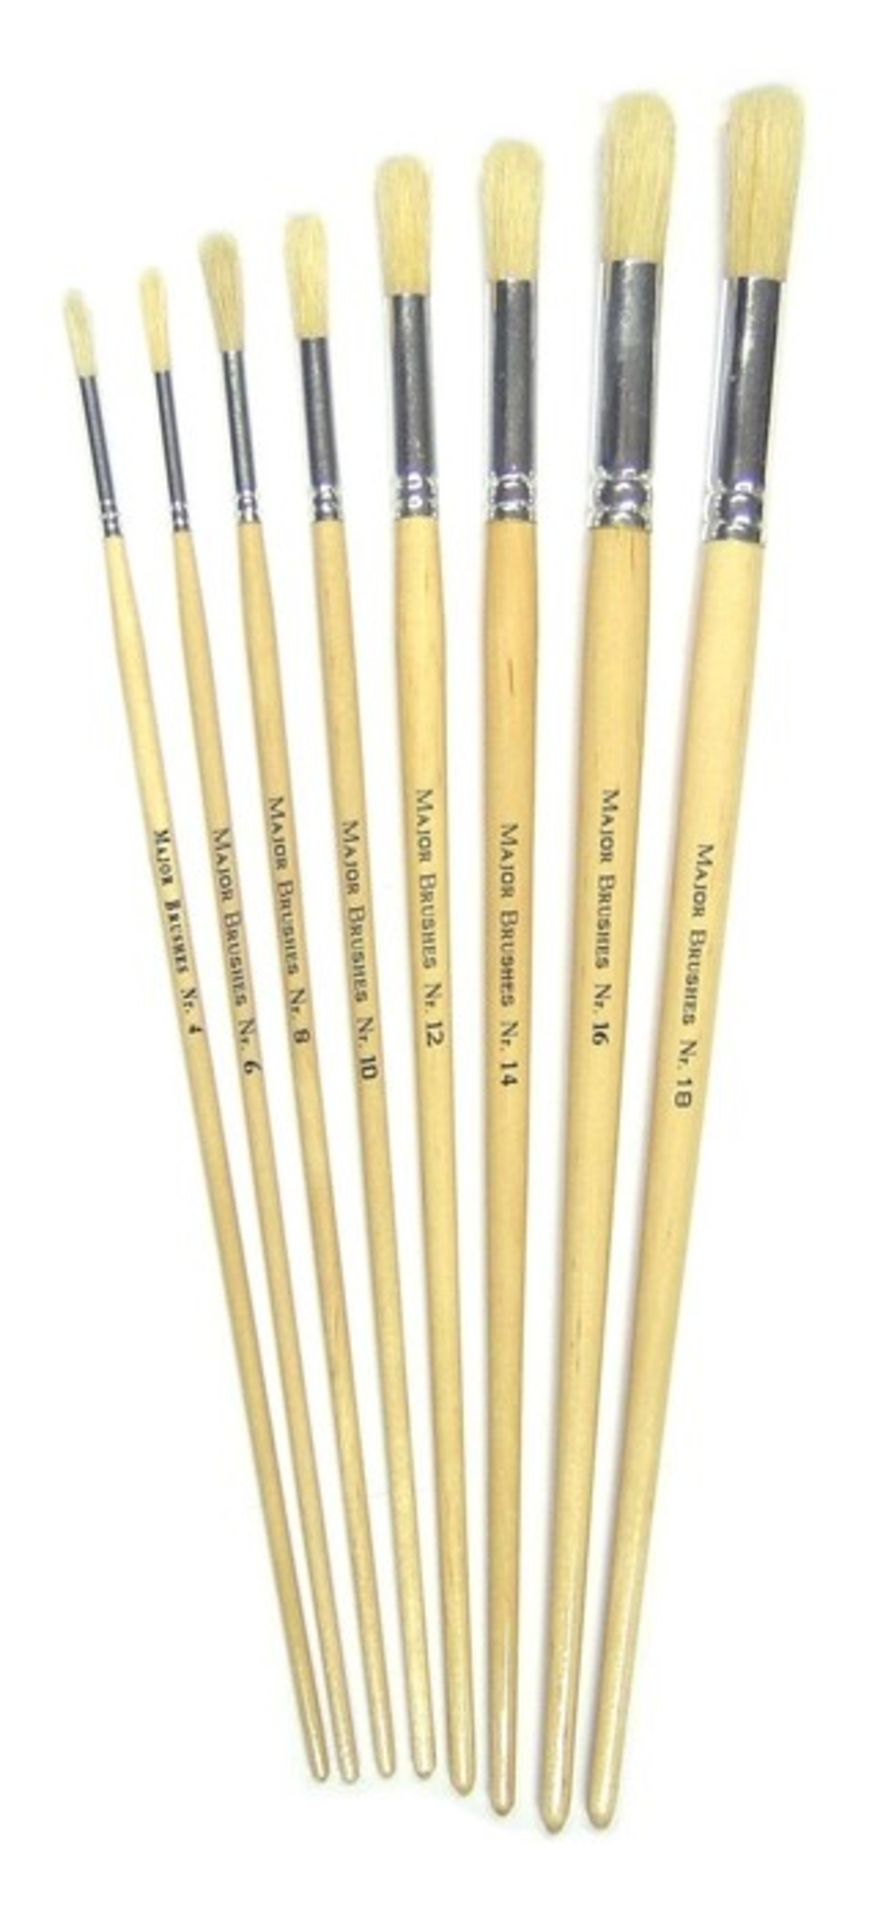 1 LOT TO CONTAIN 10 AS NEW PACKAGED MAJOR PAINT BRUSHES, SIZE 8 / QTY 10 BRUSHES PER PACK / RRP £